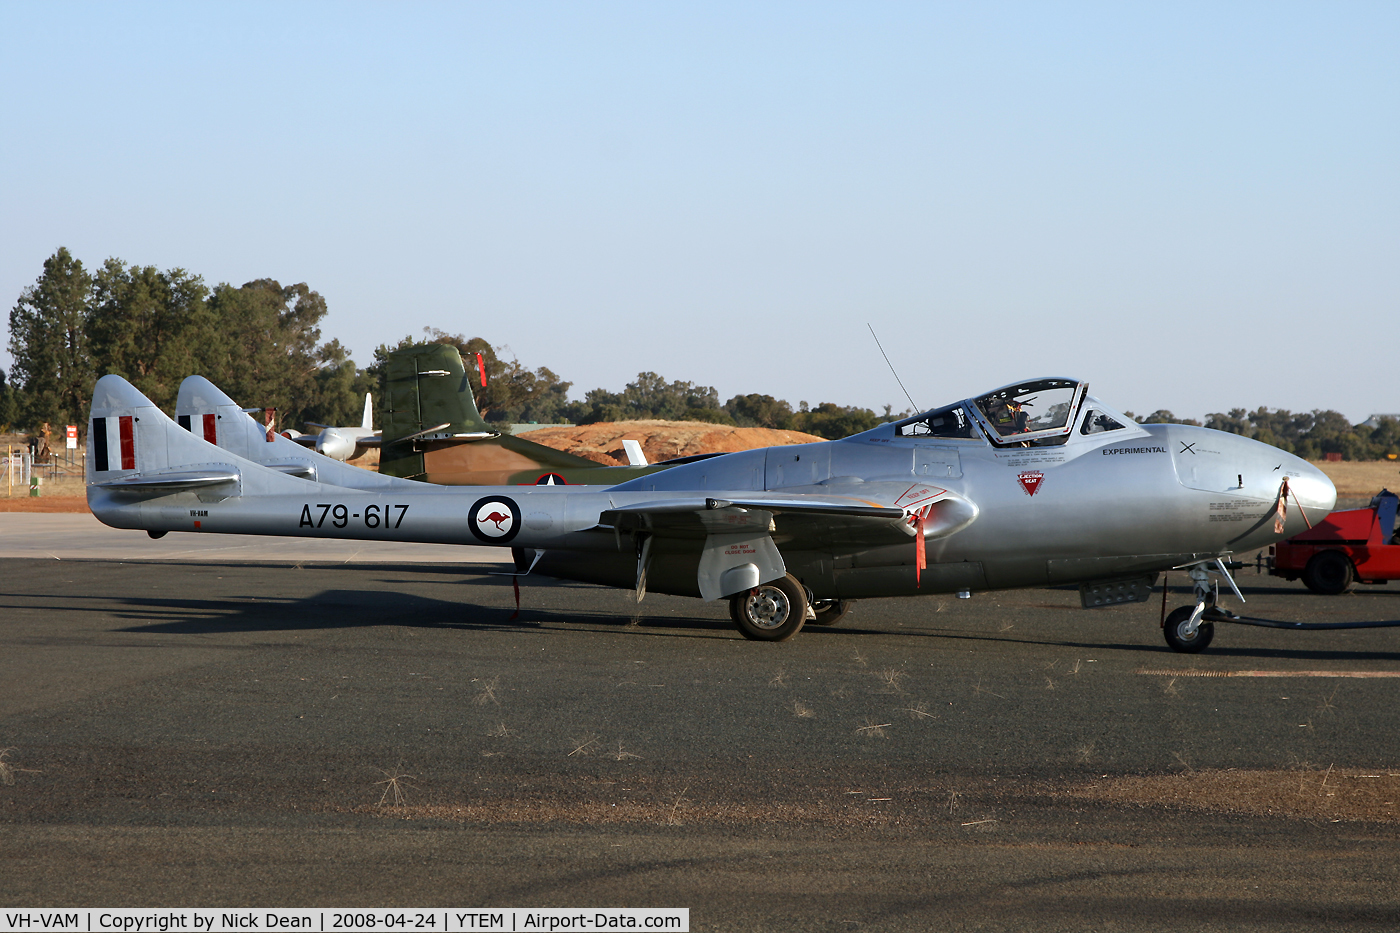 VH-VAM, 1951 De Havilland Australia DH-115 Vampire T.35 C/N DHA4171, Yet again the C/N is not the miitary registration, the C/N (Construction number) of this frame is 4139